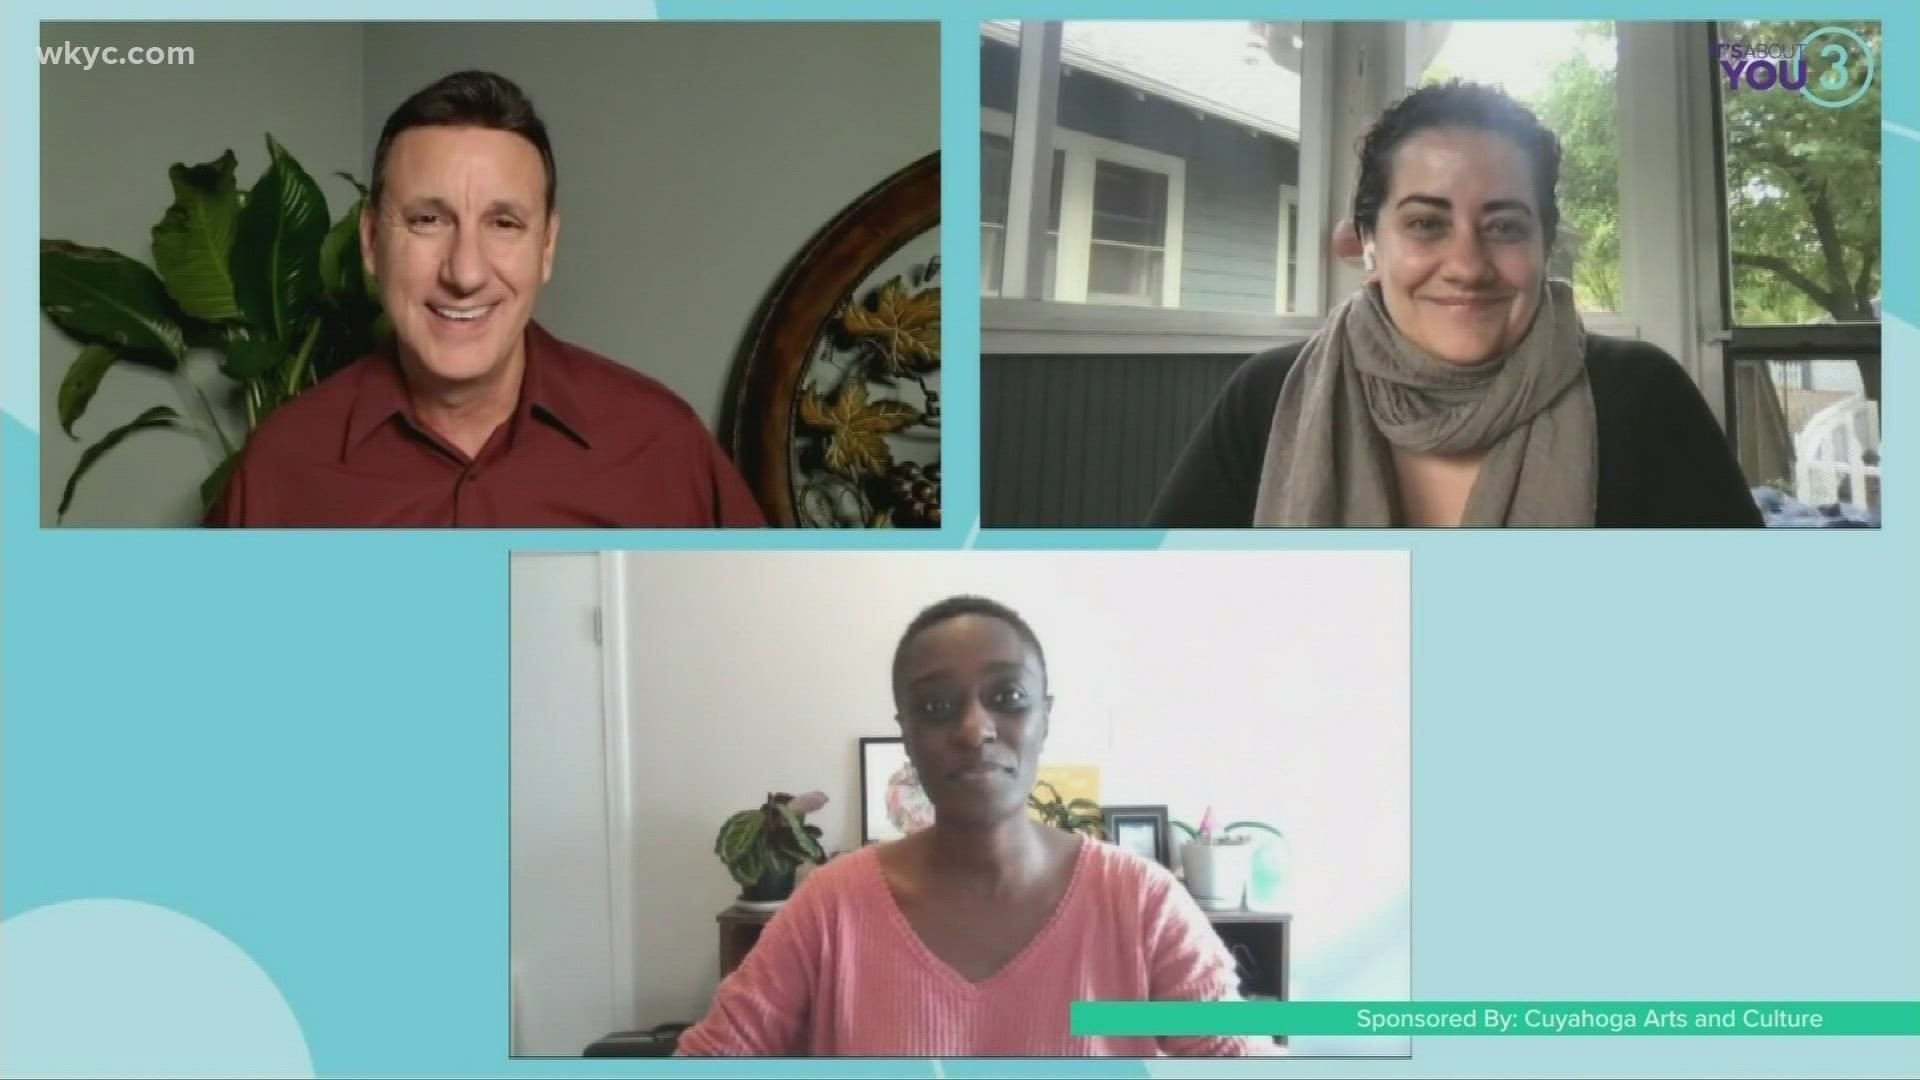 Joe is talking with India Pierre-Ingram & Celeste Cosentino from Cuyahoga Arts & Culture about upcoming virtual performances like Ensemble Theater!